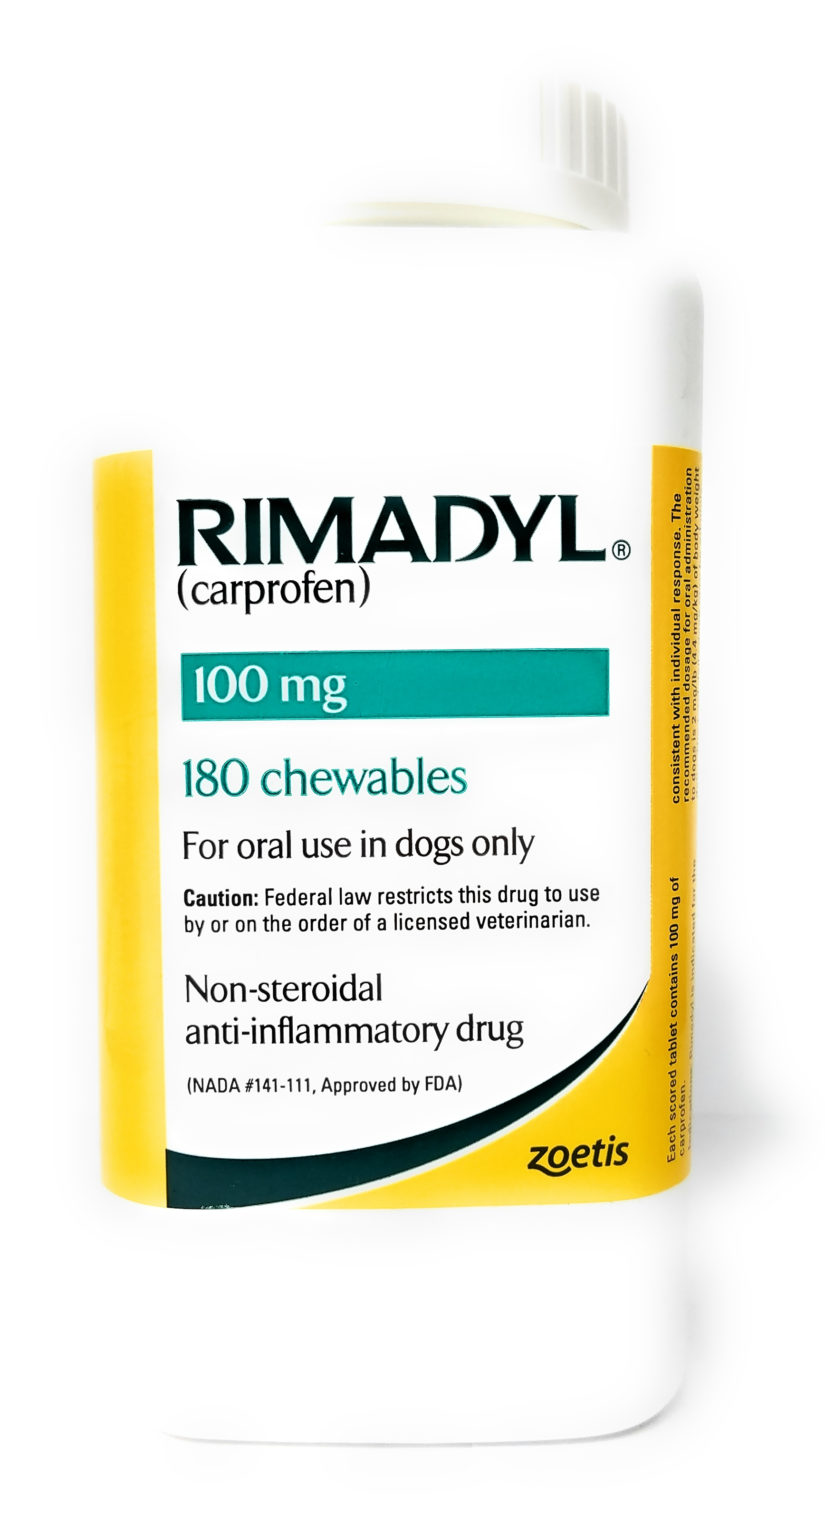 vet-approved-rx-rimadyl-100mg-chewable-tablets-180-count-bottle-for-pets